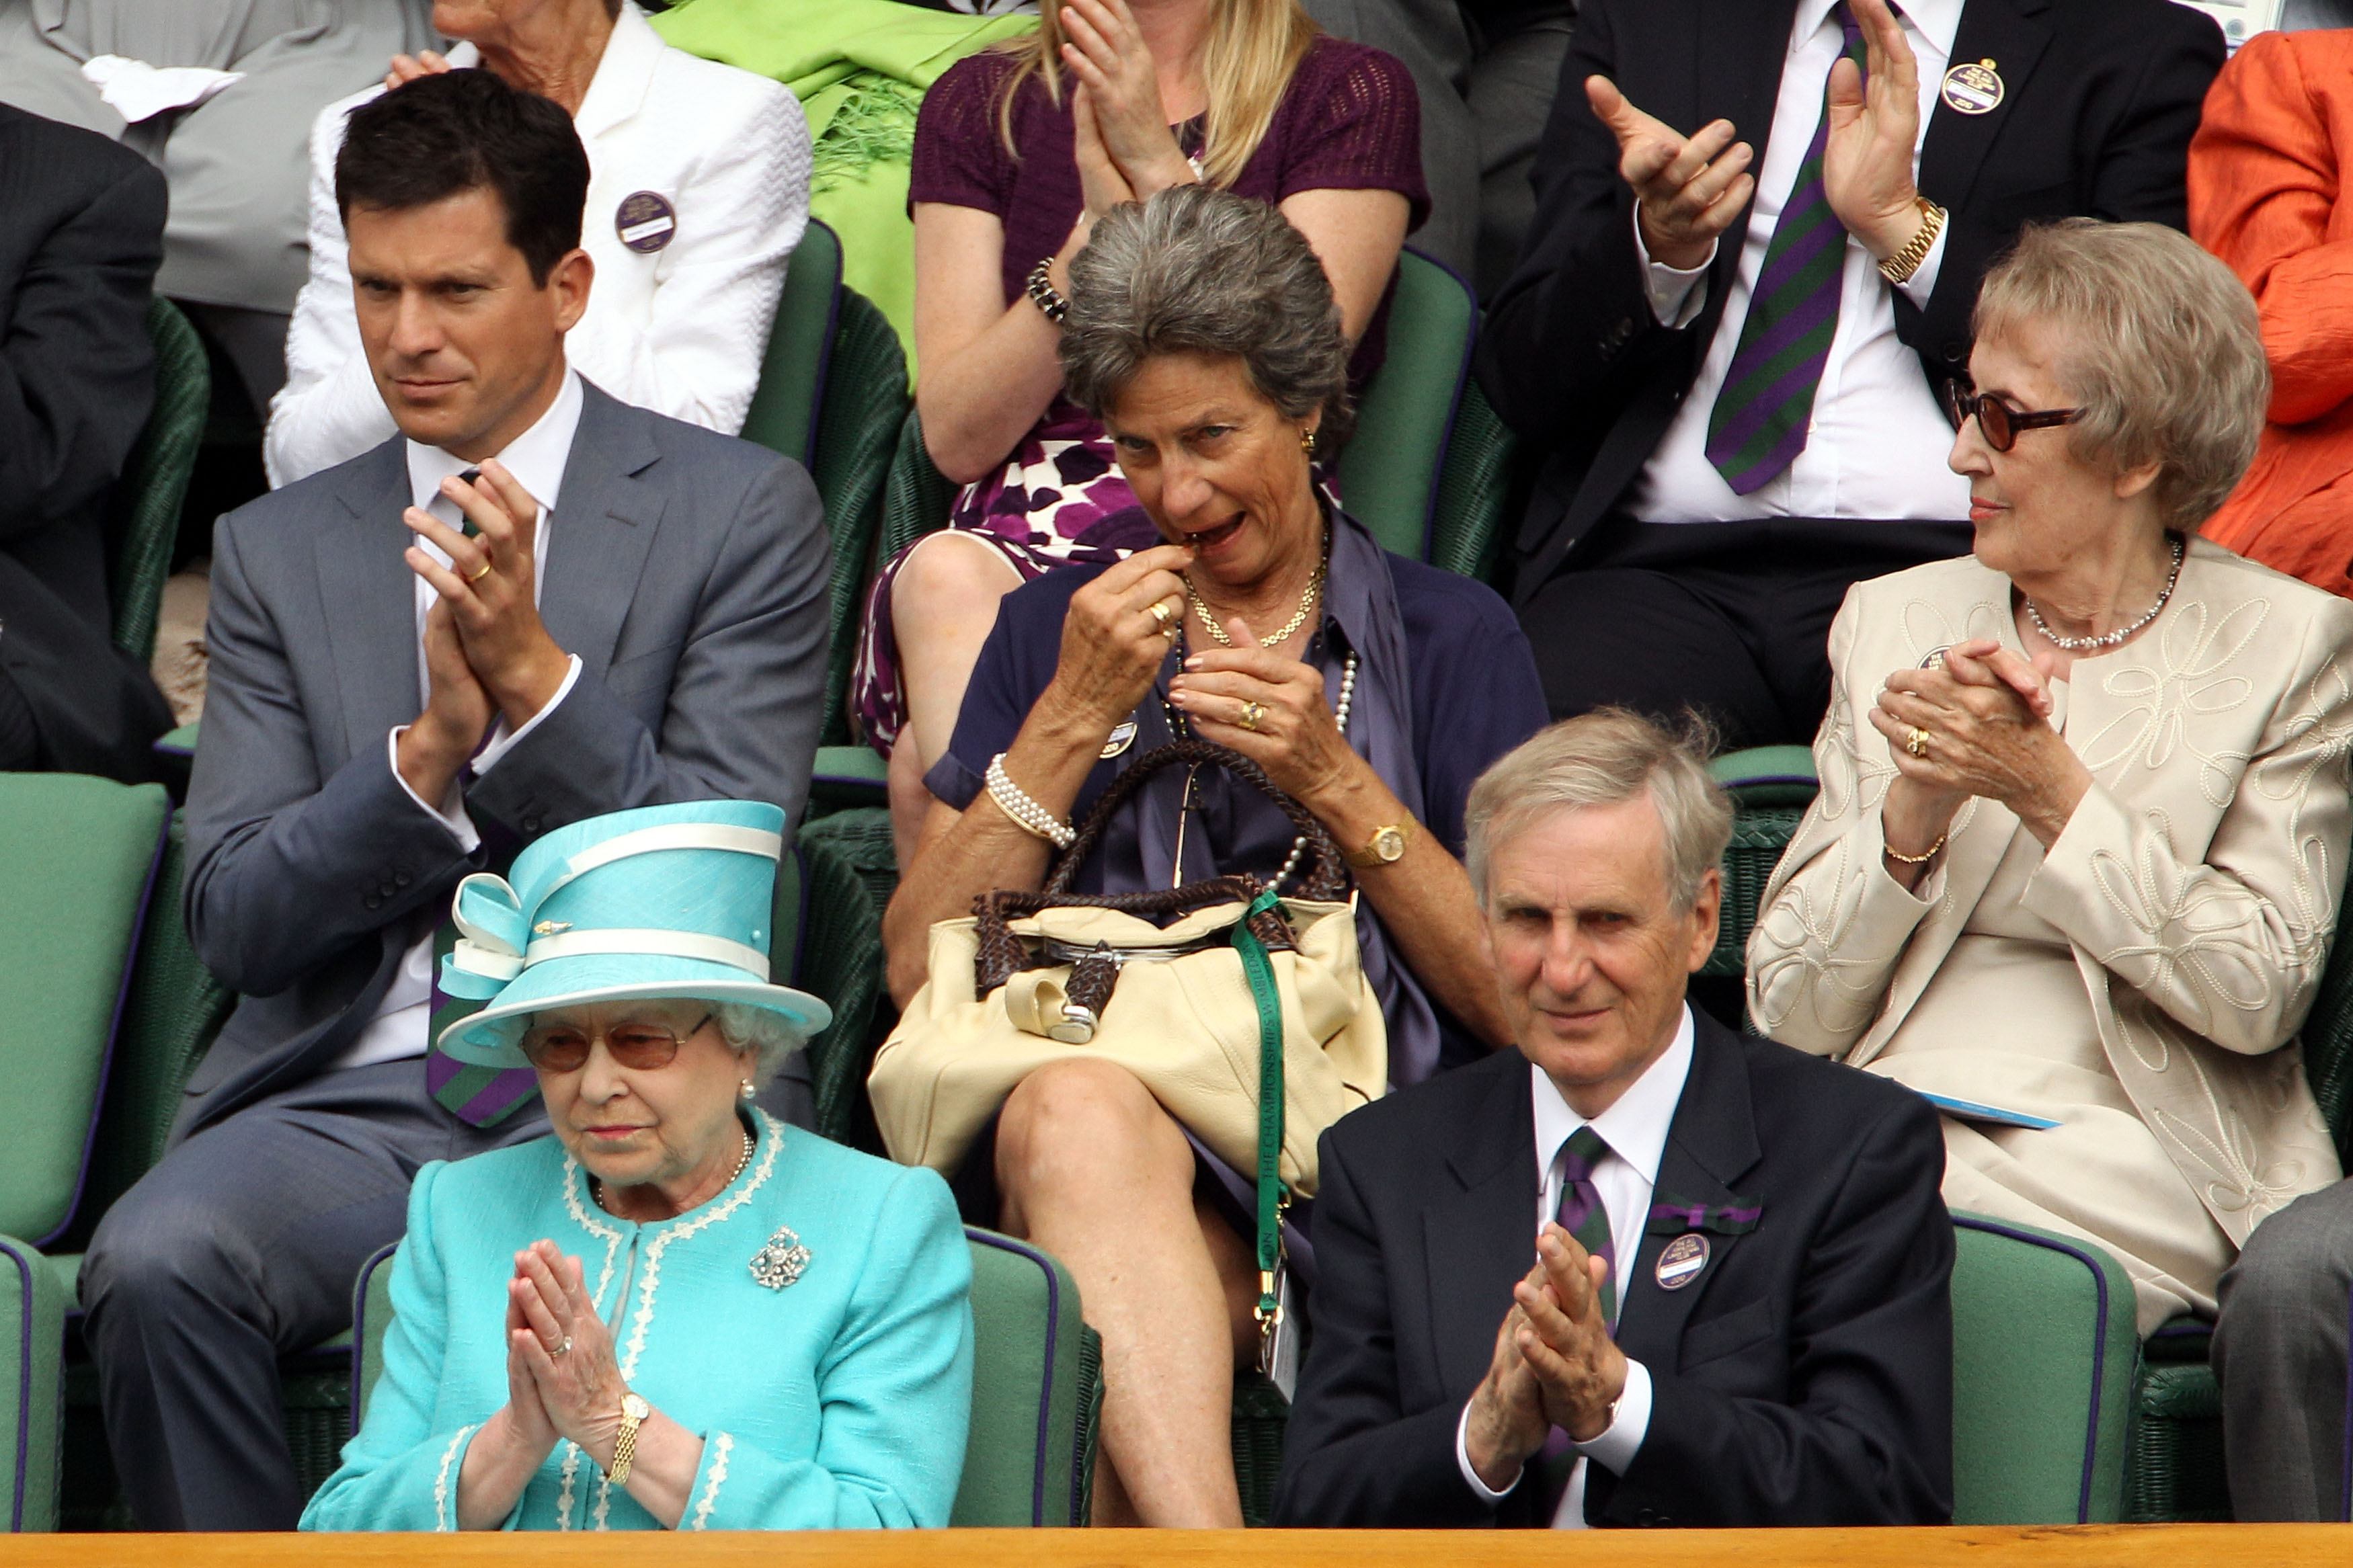 LONDON, ENGLAND - JUNE 24:  Tim Henman (top), and Queen Elizabeth II applaud as Andy Murray of Great Britain beats Jarkko Nieminen of Finland on Day Four of the Wimbledon Lawn Tennis Championships at the All England Lawn Tennis and Croquet Club on June 24